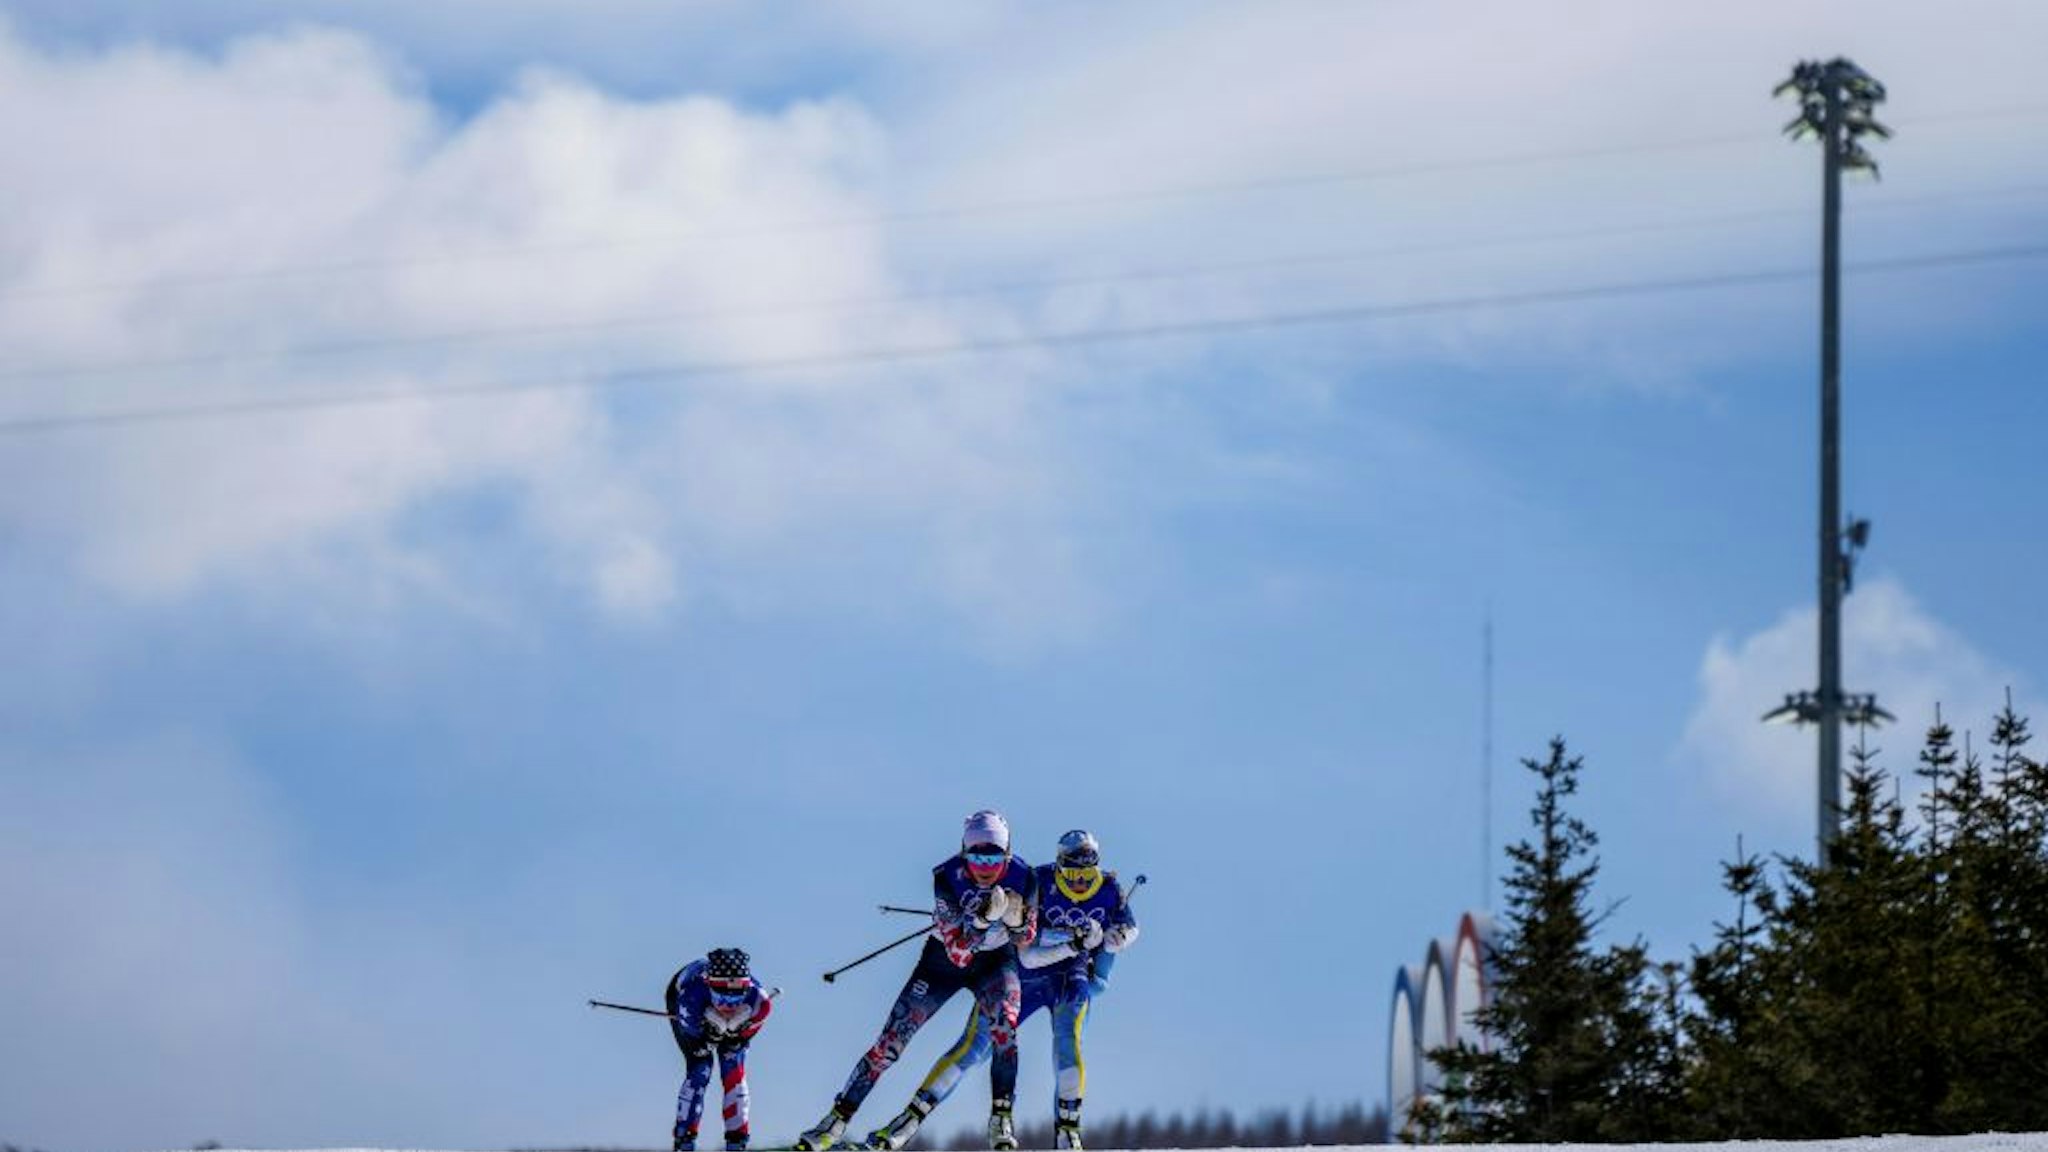 Therese Johaug C of Norway, Ebba Andersson R of Sweden, and Jessie Diggins of the United States compete during the cross-country skiing women's 30km mass start free of Beijing 2022 Winter Olympics at National Cross-Country Skiing Centre in Zhangjiakou, north China's Hebei Province, Feb. 20, 2022. (Photo by Liu Chan/Xinhua via Getty Images)